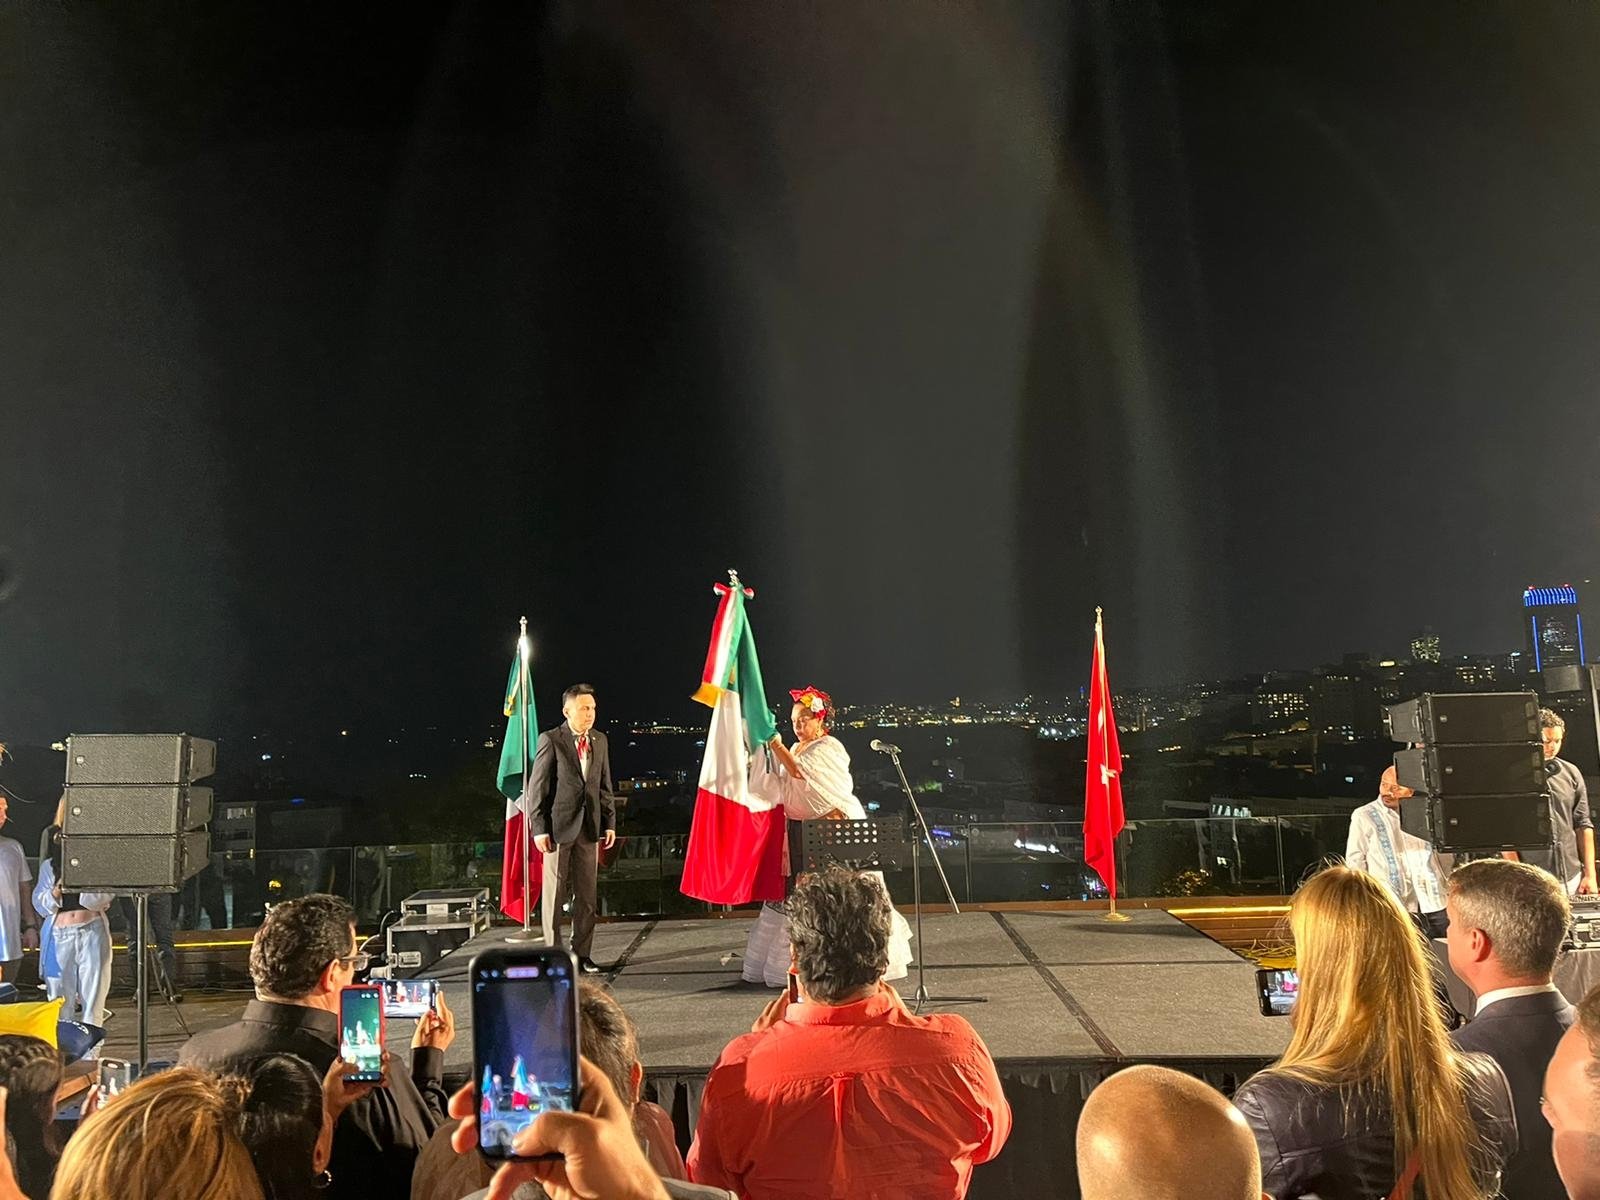 The Mexican Consulate&#039;s Istanbul Consul Isabel Arvide (R) and Deputy Consul Julio Escobado (L) waving the Mexican flag in the celebration, Istanbul, Türkiye, Sept. 16, 2022. (Photo by Buse Keskin)